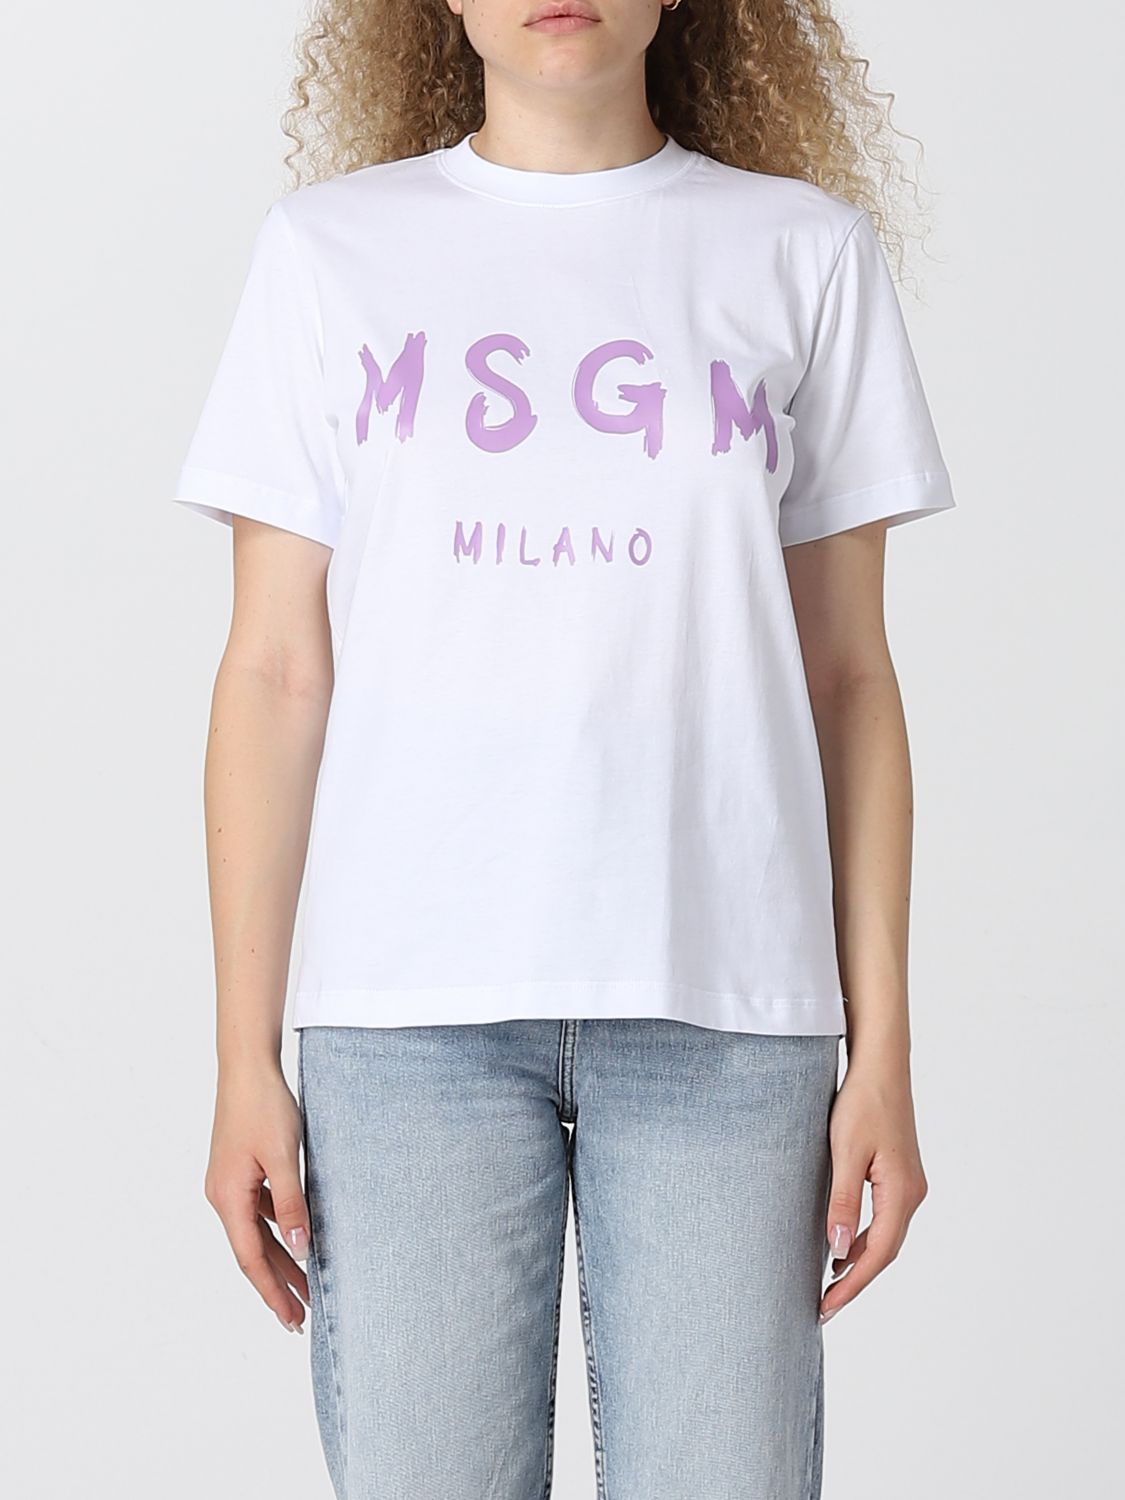 Msgm t-shirt for woman